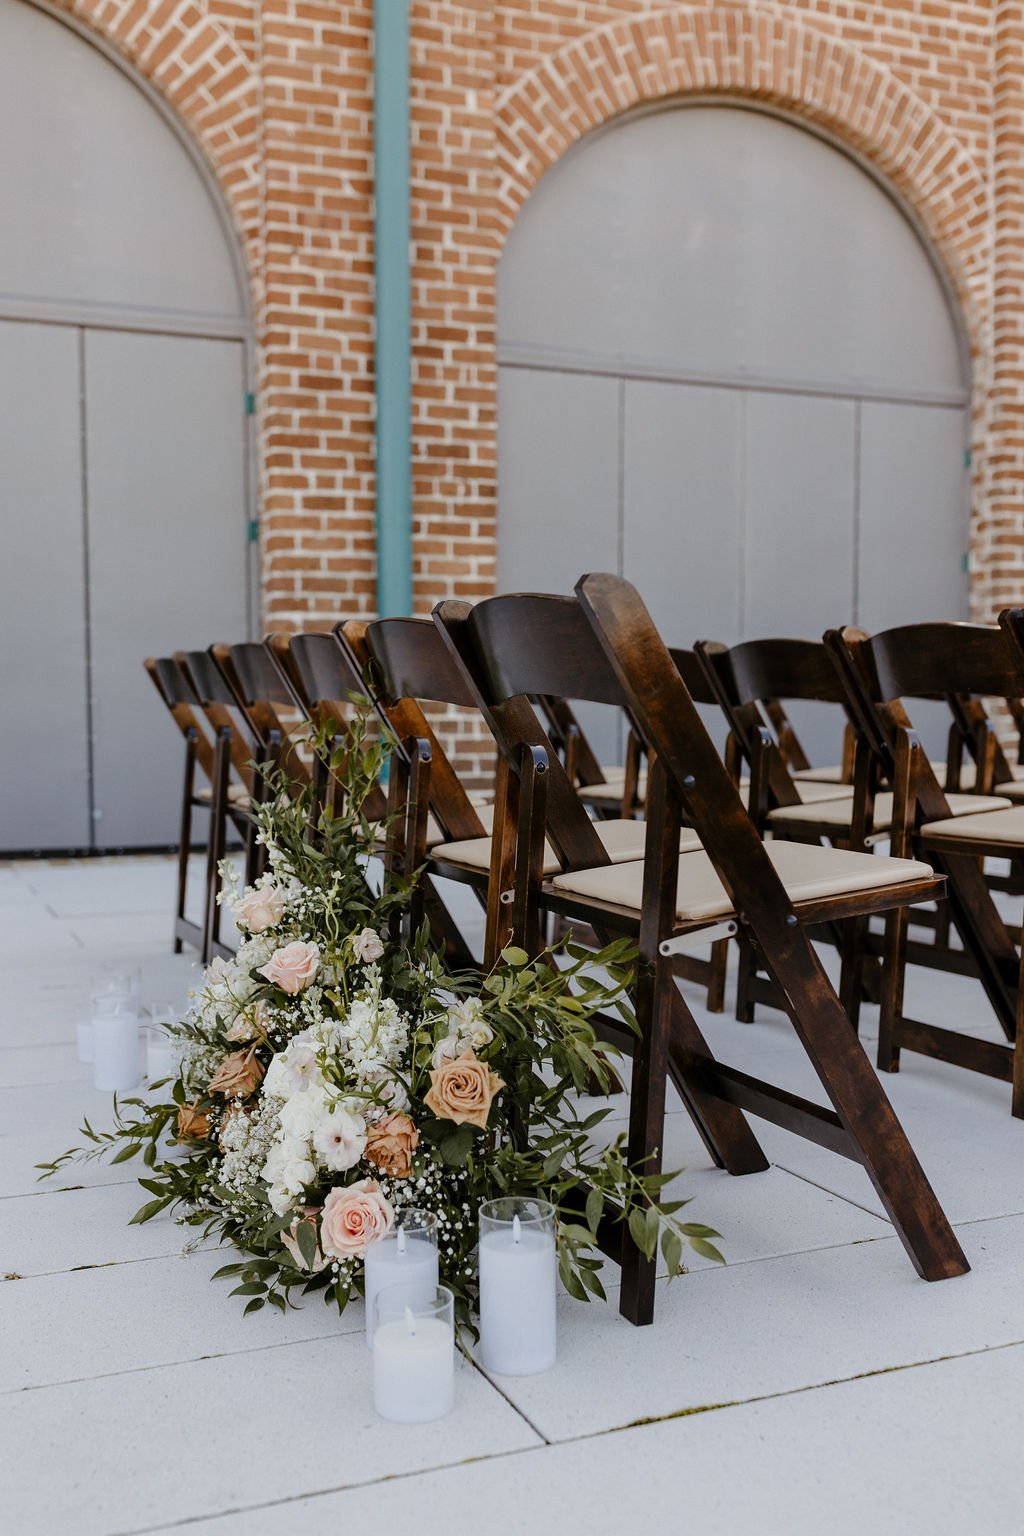 olivia-and-ryans-modern-industrial-chic-savannah-wedding-at-kehoe-iron-works-planned-by-savannah-wedding-planner-and-florist-ivory-and-beau-6.jpg